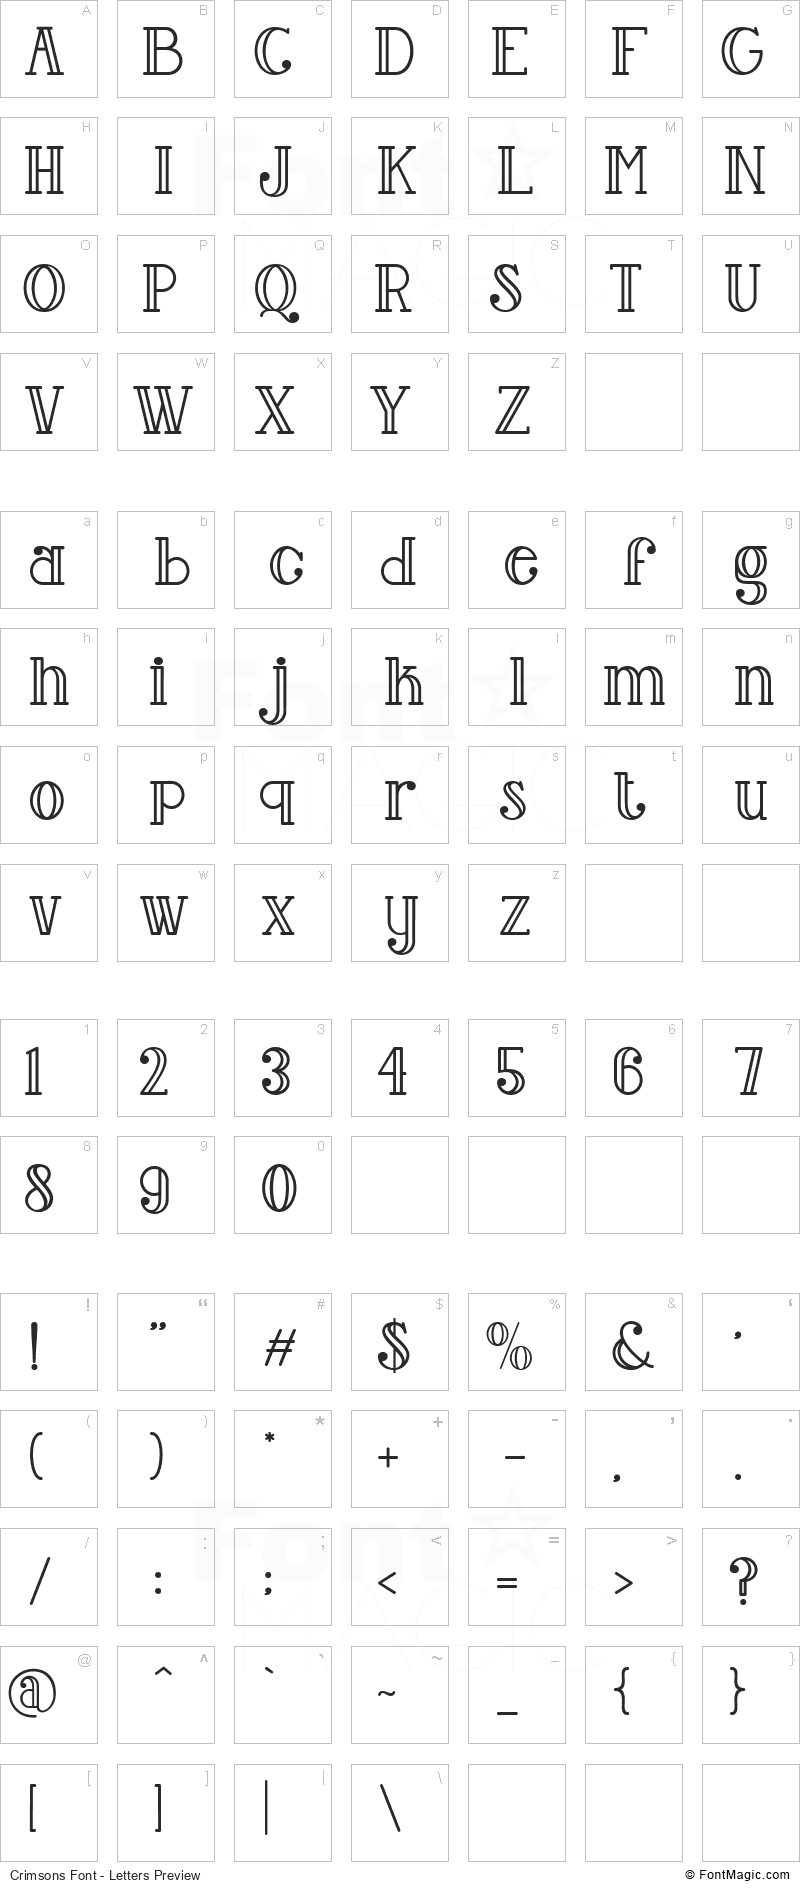 Crimsons Font - All Latters Preview Chart